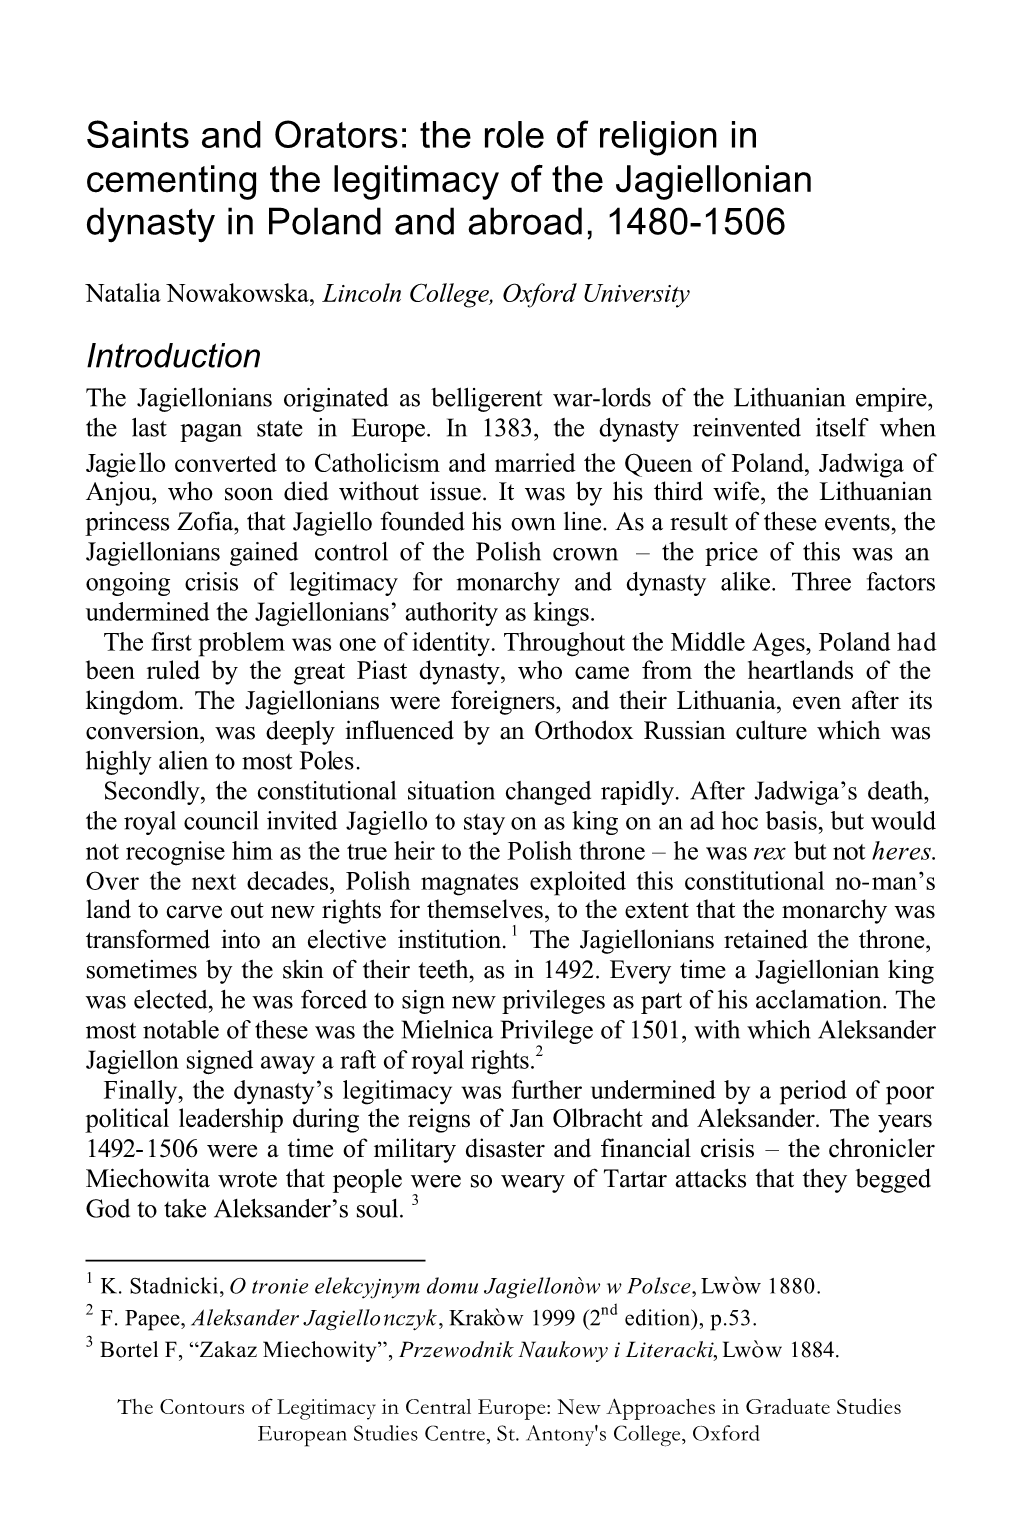 The Role of Religion in Cementing the Legitimacy of the Jagiellonian Dynasty in Poland and Abroad, 1480-1506